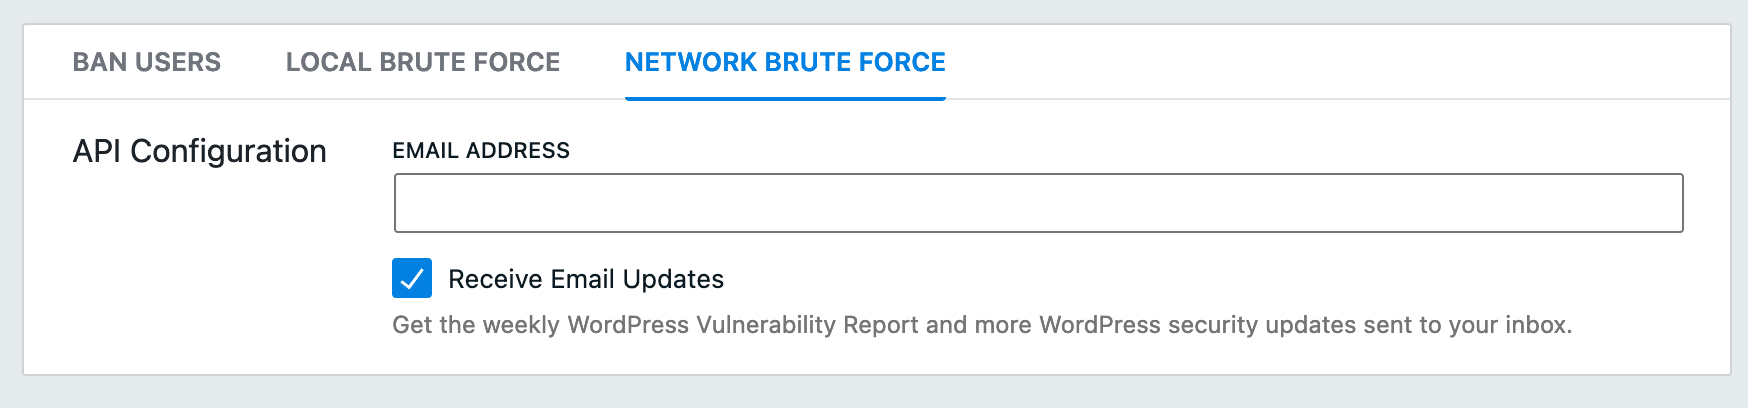 Network brute force offered by iThemes Security.